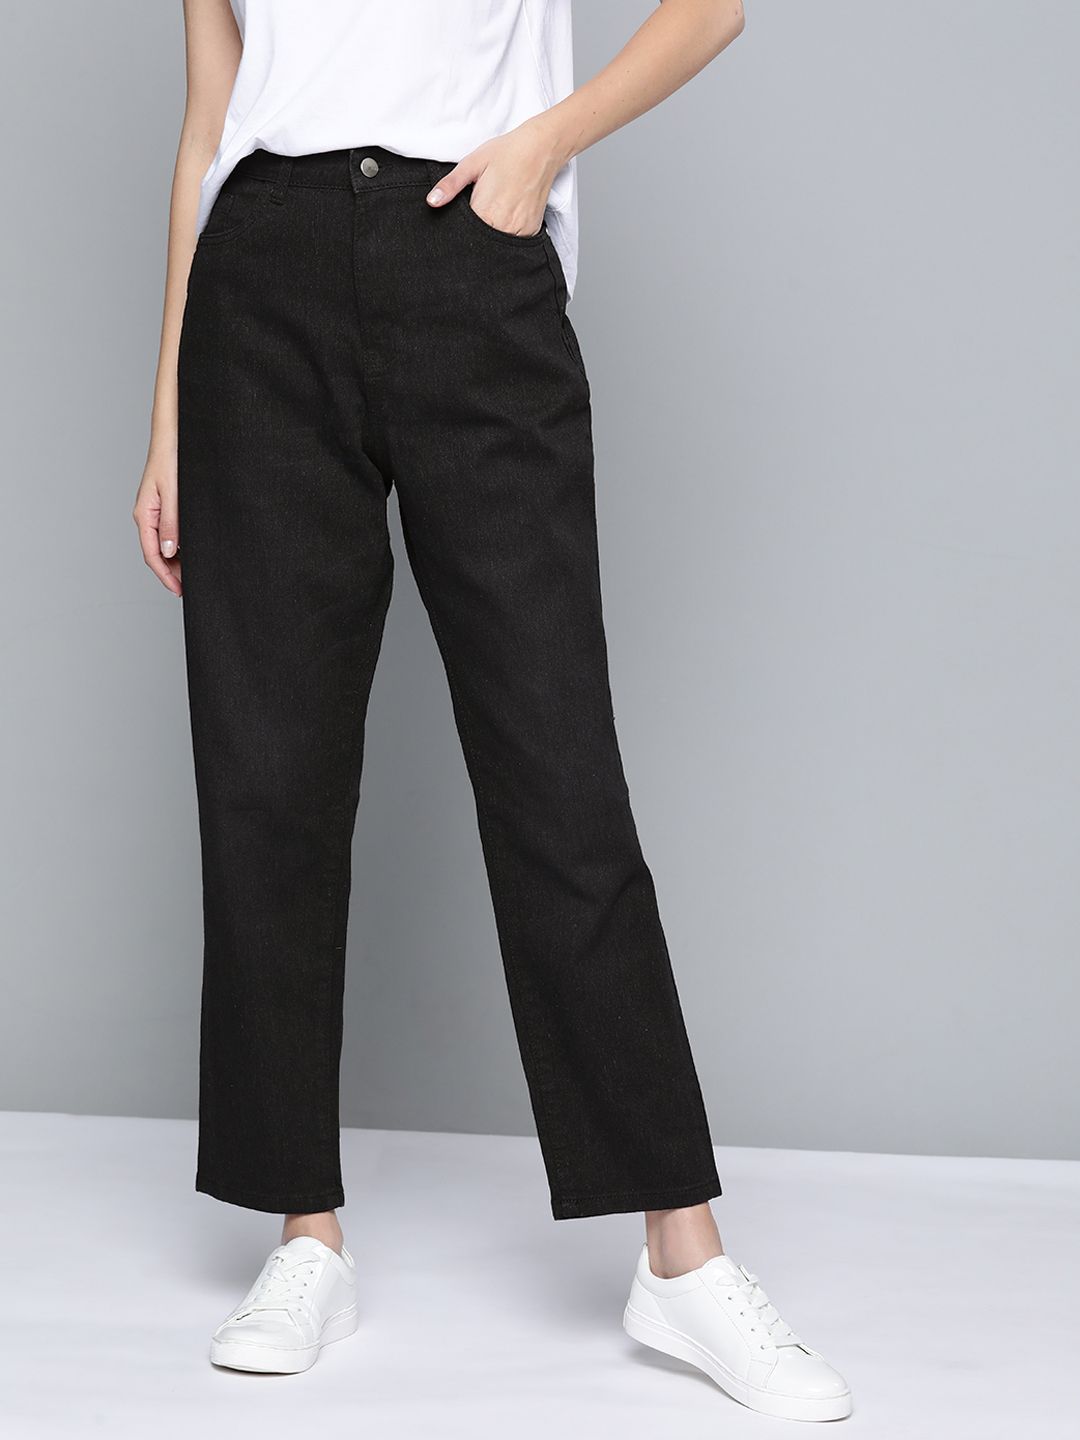 Mast & Harbour Women Black Boyfriend Fit Stretchable Jeans Price in India